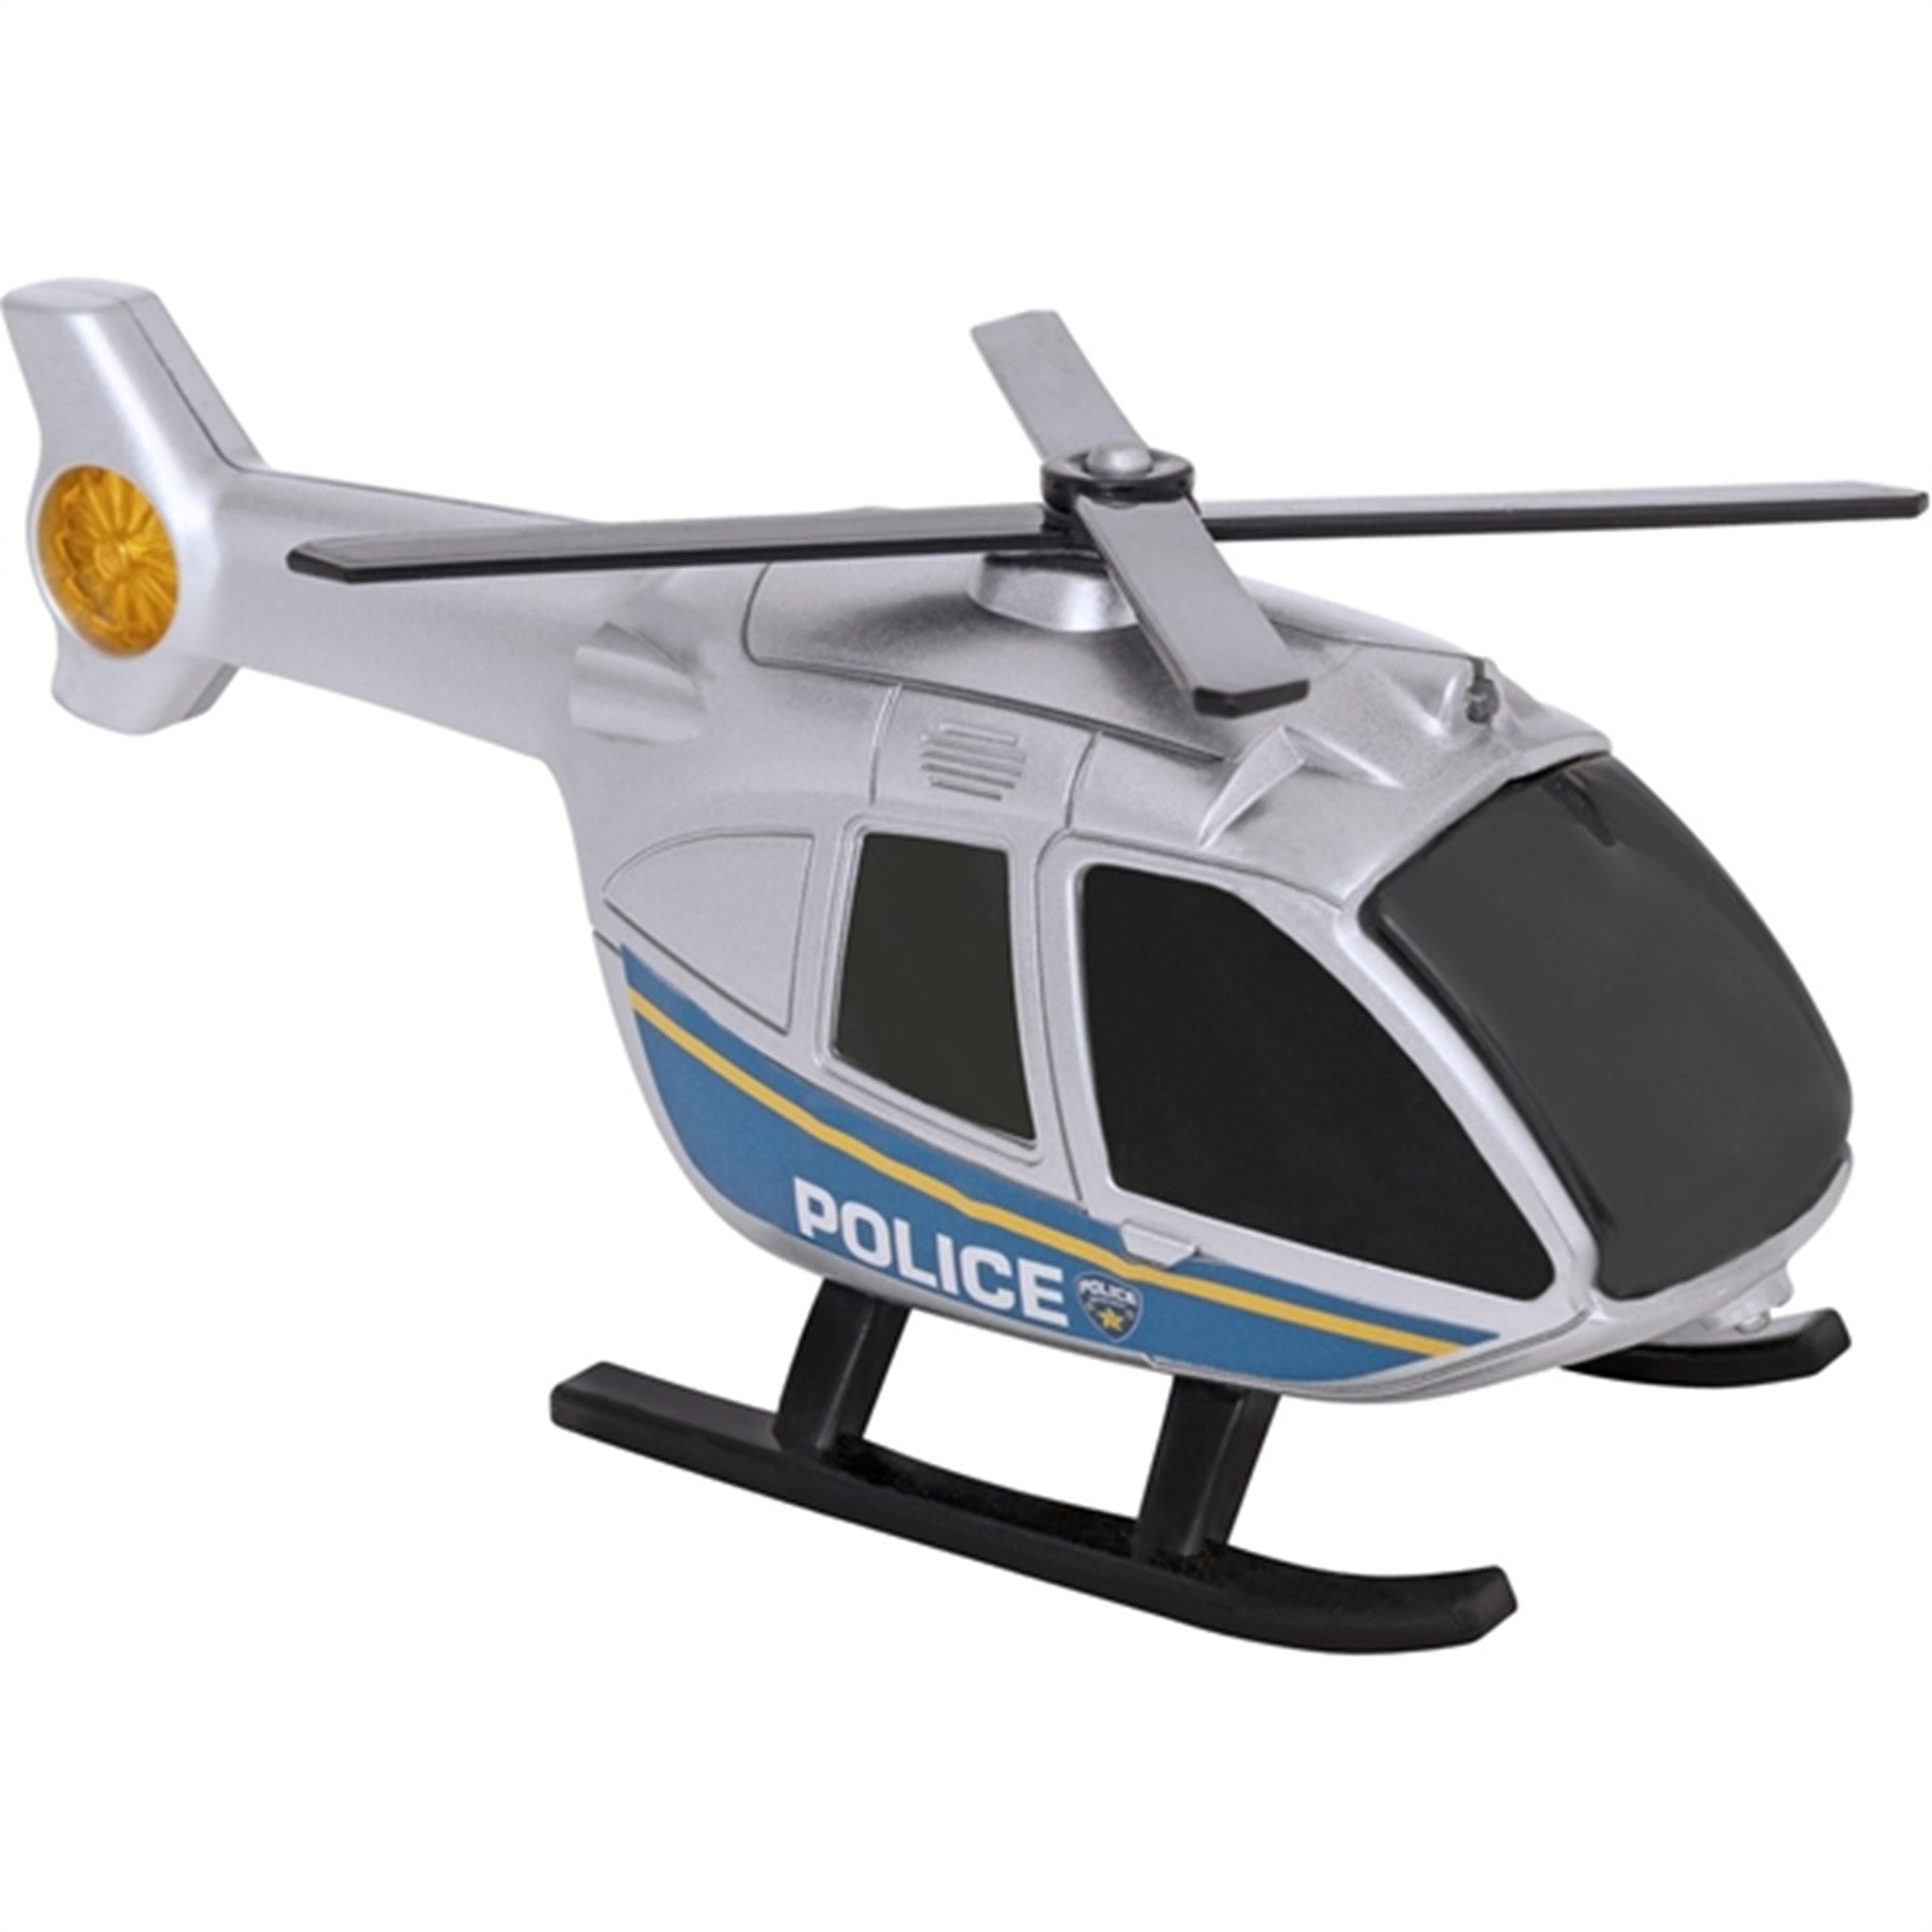 Teamsterz Small L&S Helikopter 3